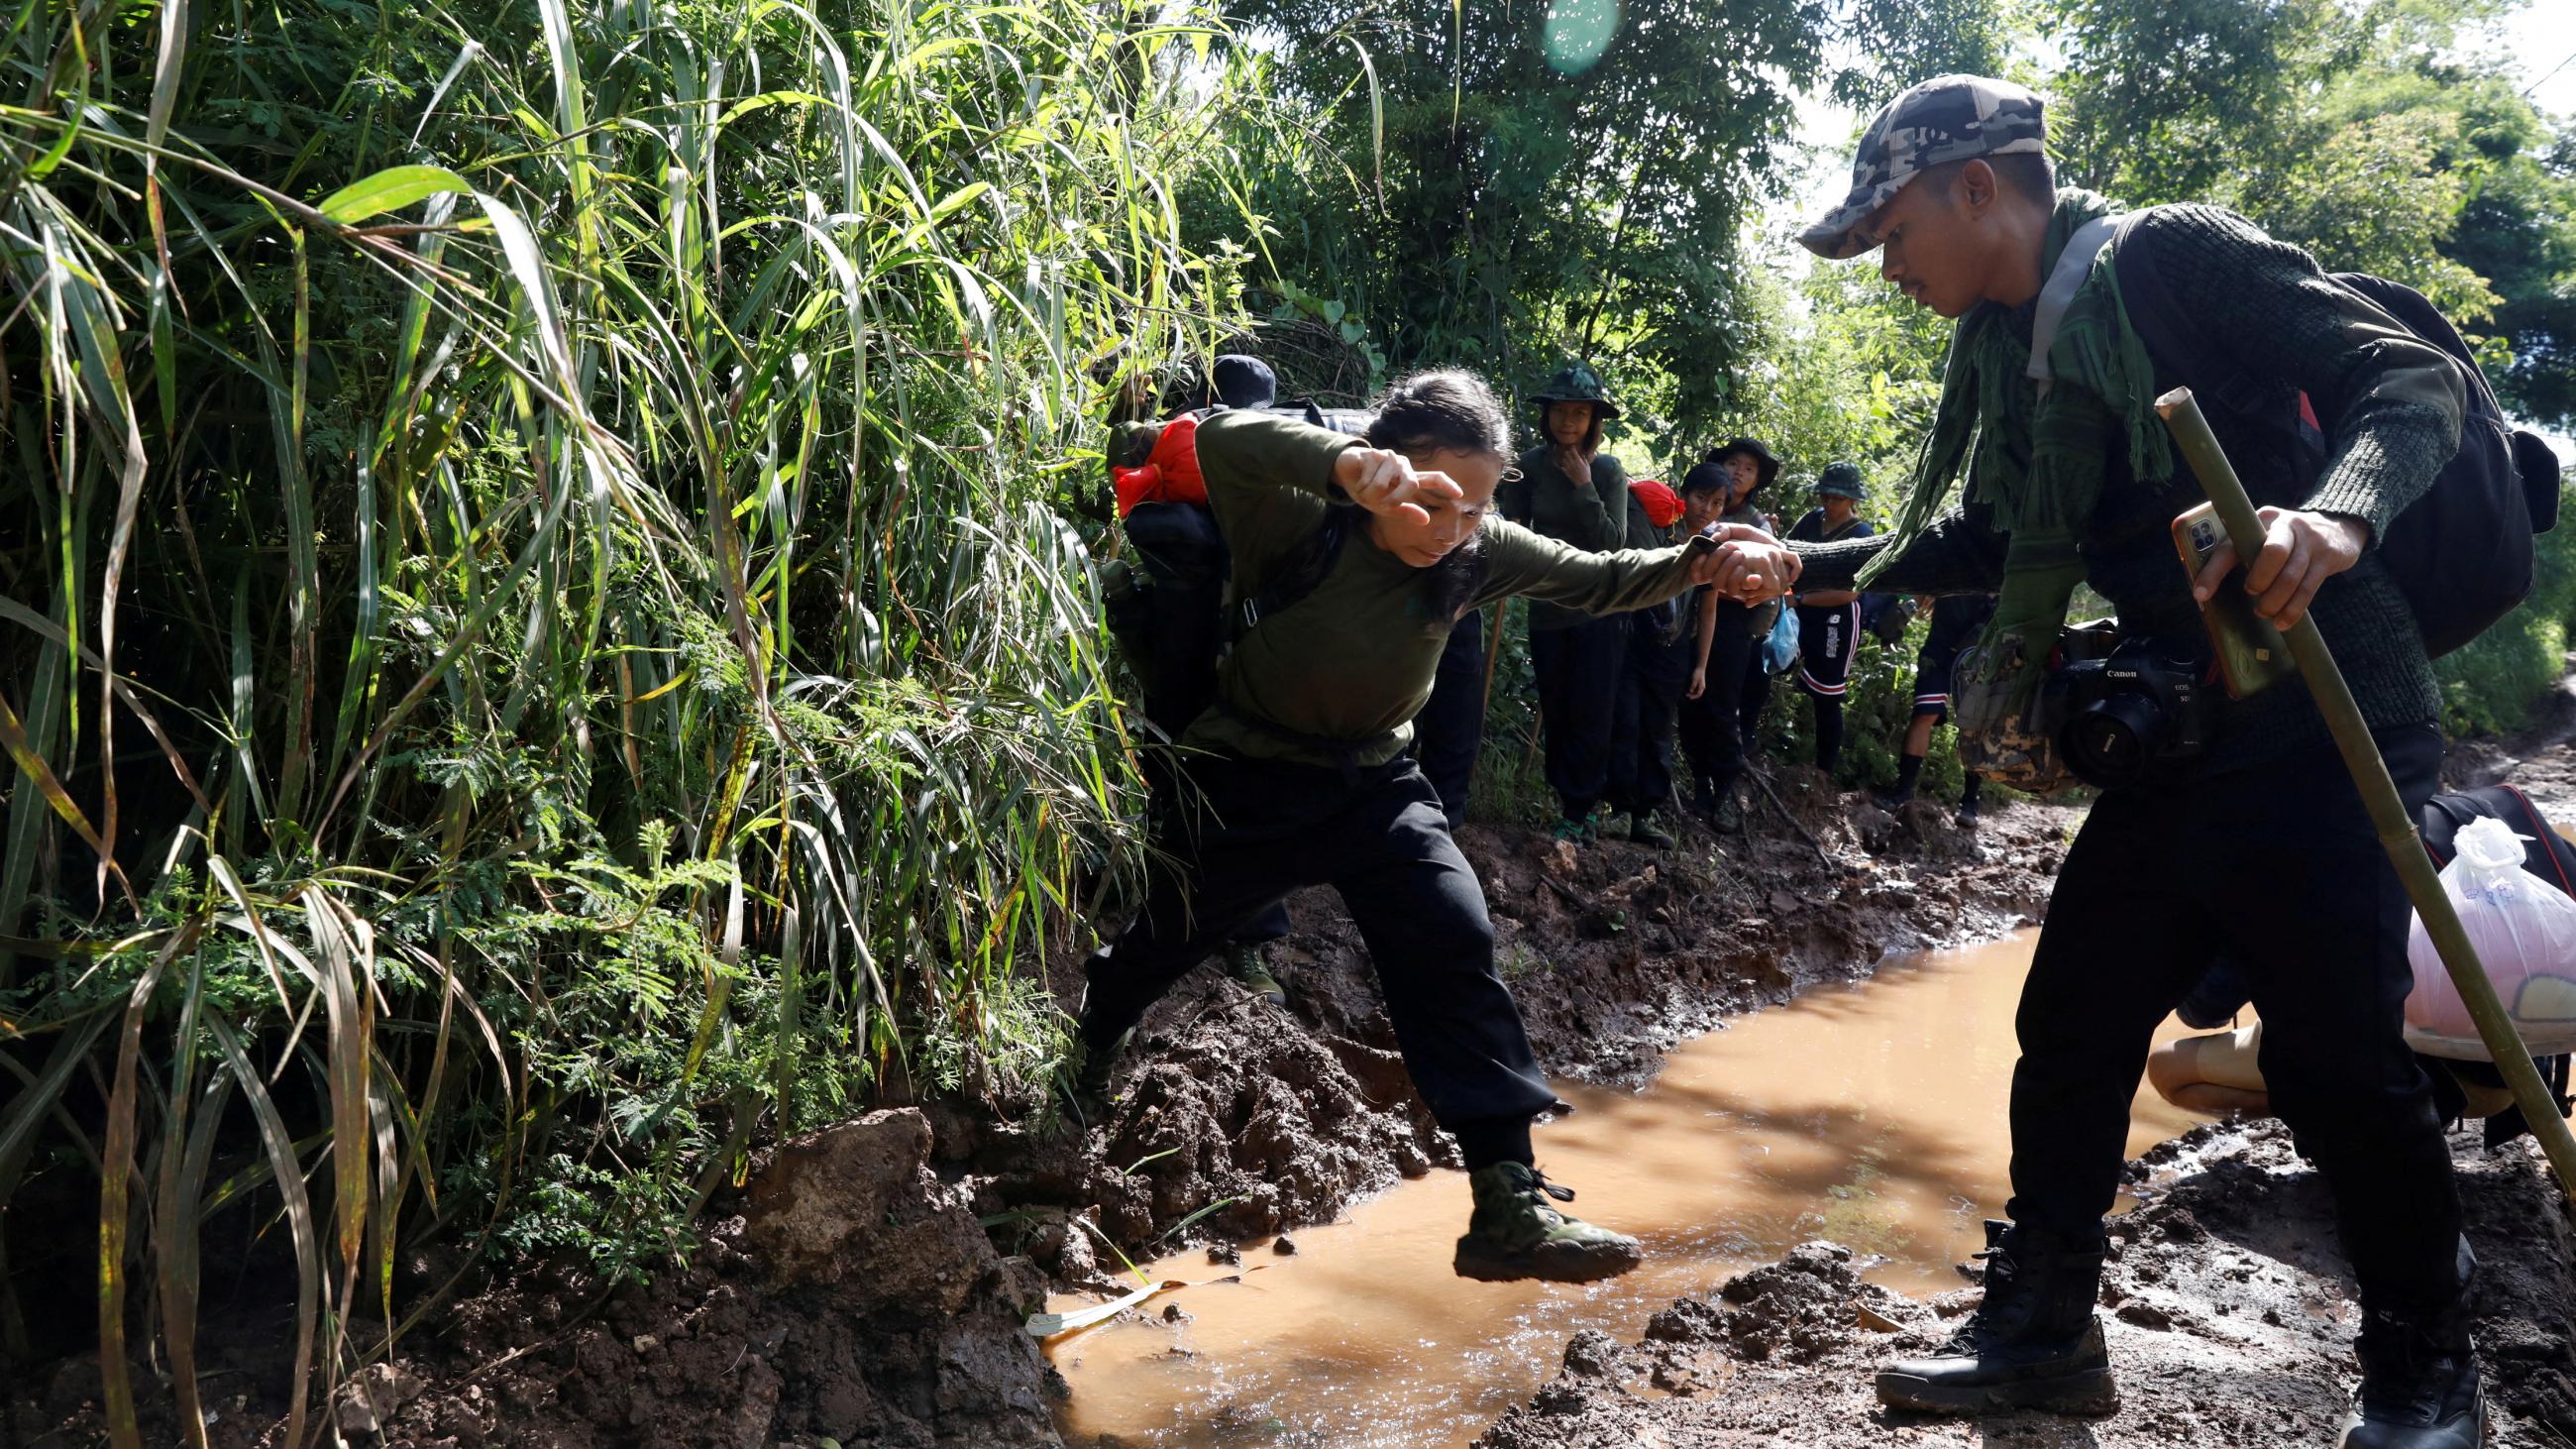 A rebel soldier helps a young female soldier cross a muddy stream surrounded by dense green jungle.